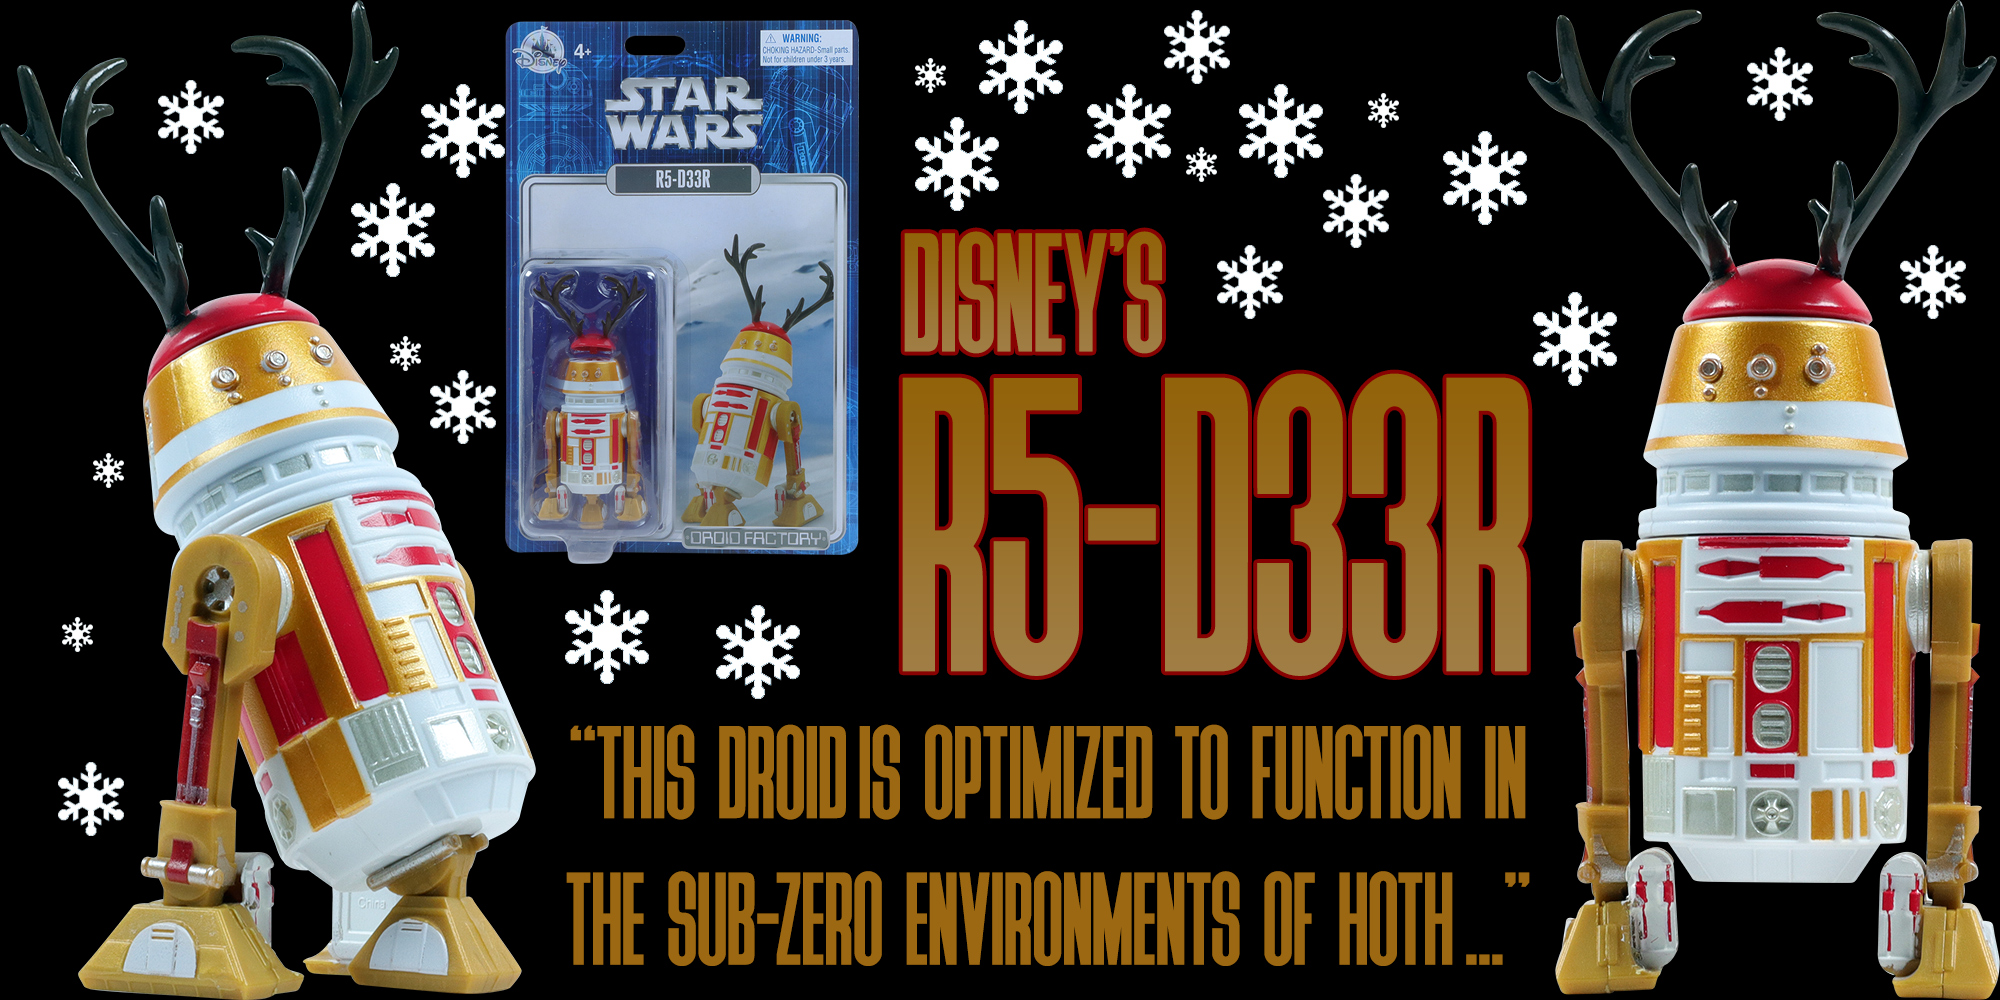 Holiday Droid R5-D33R - Now Archived